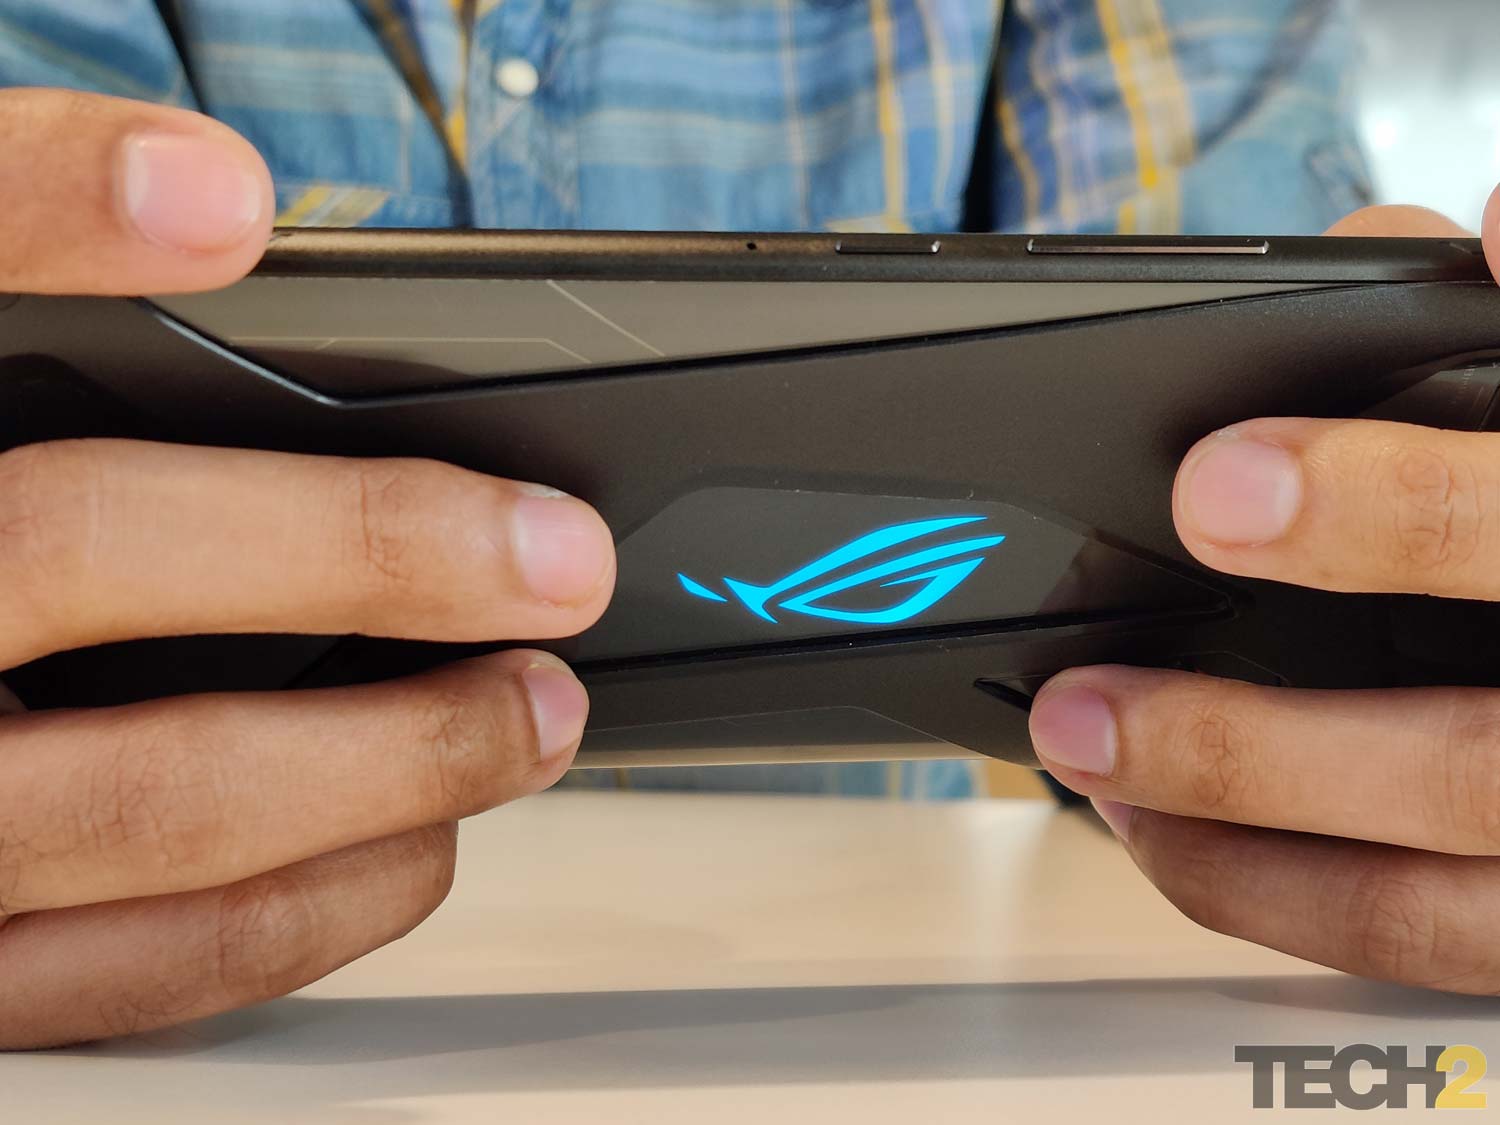 If you're looking for a gaming smartphone, the Asus ROG Phone II could be your best choice. Image: tech2/Abhijit Dey.